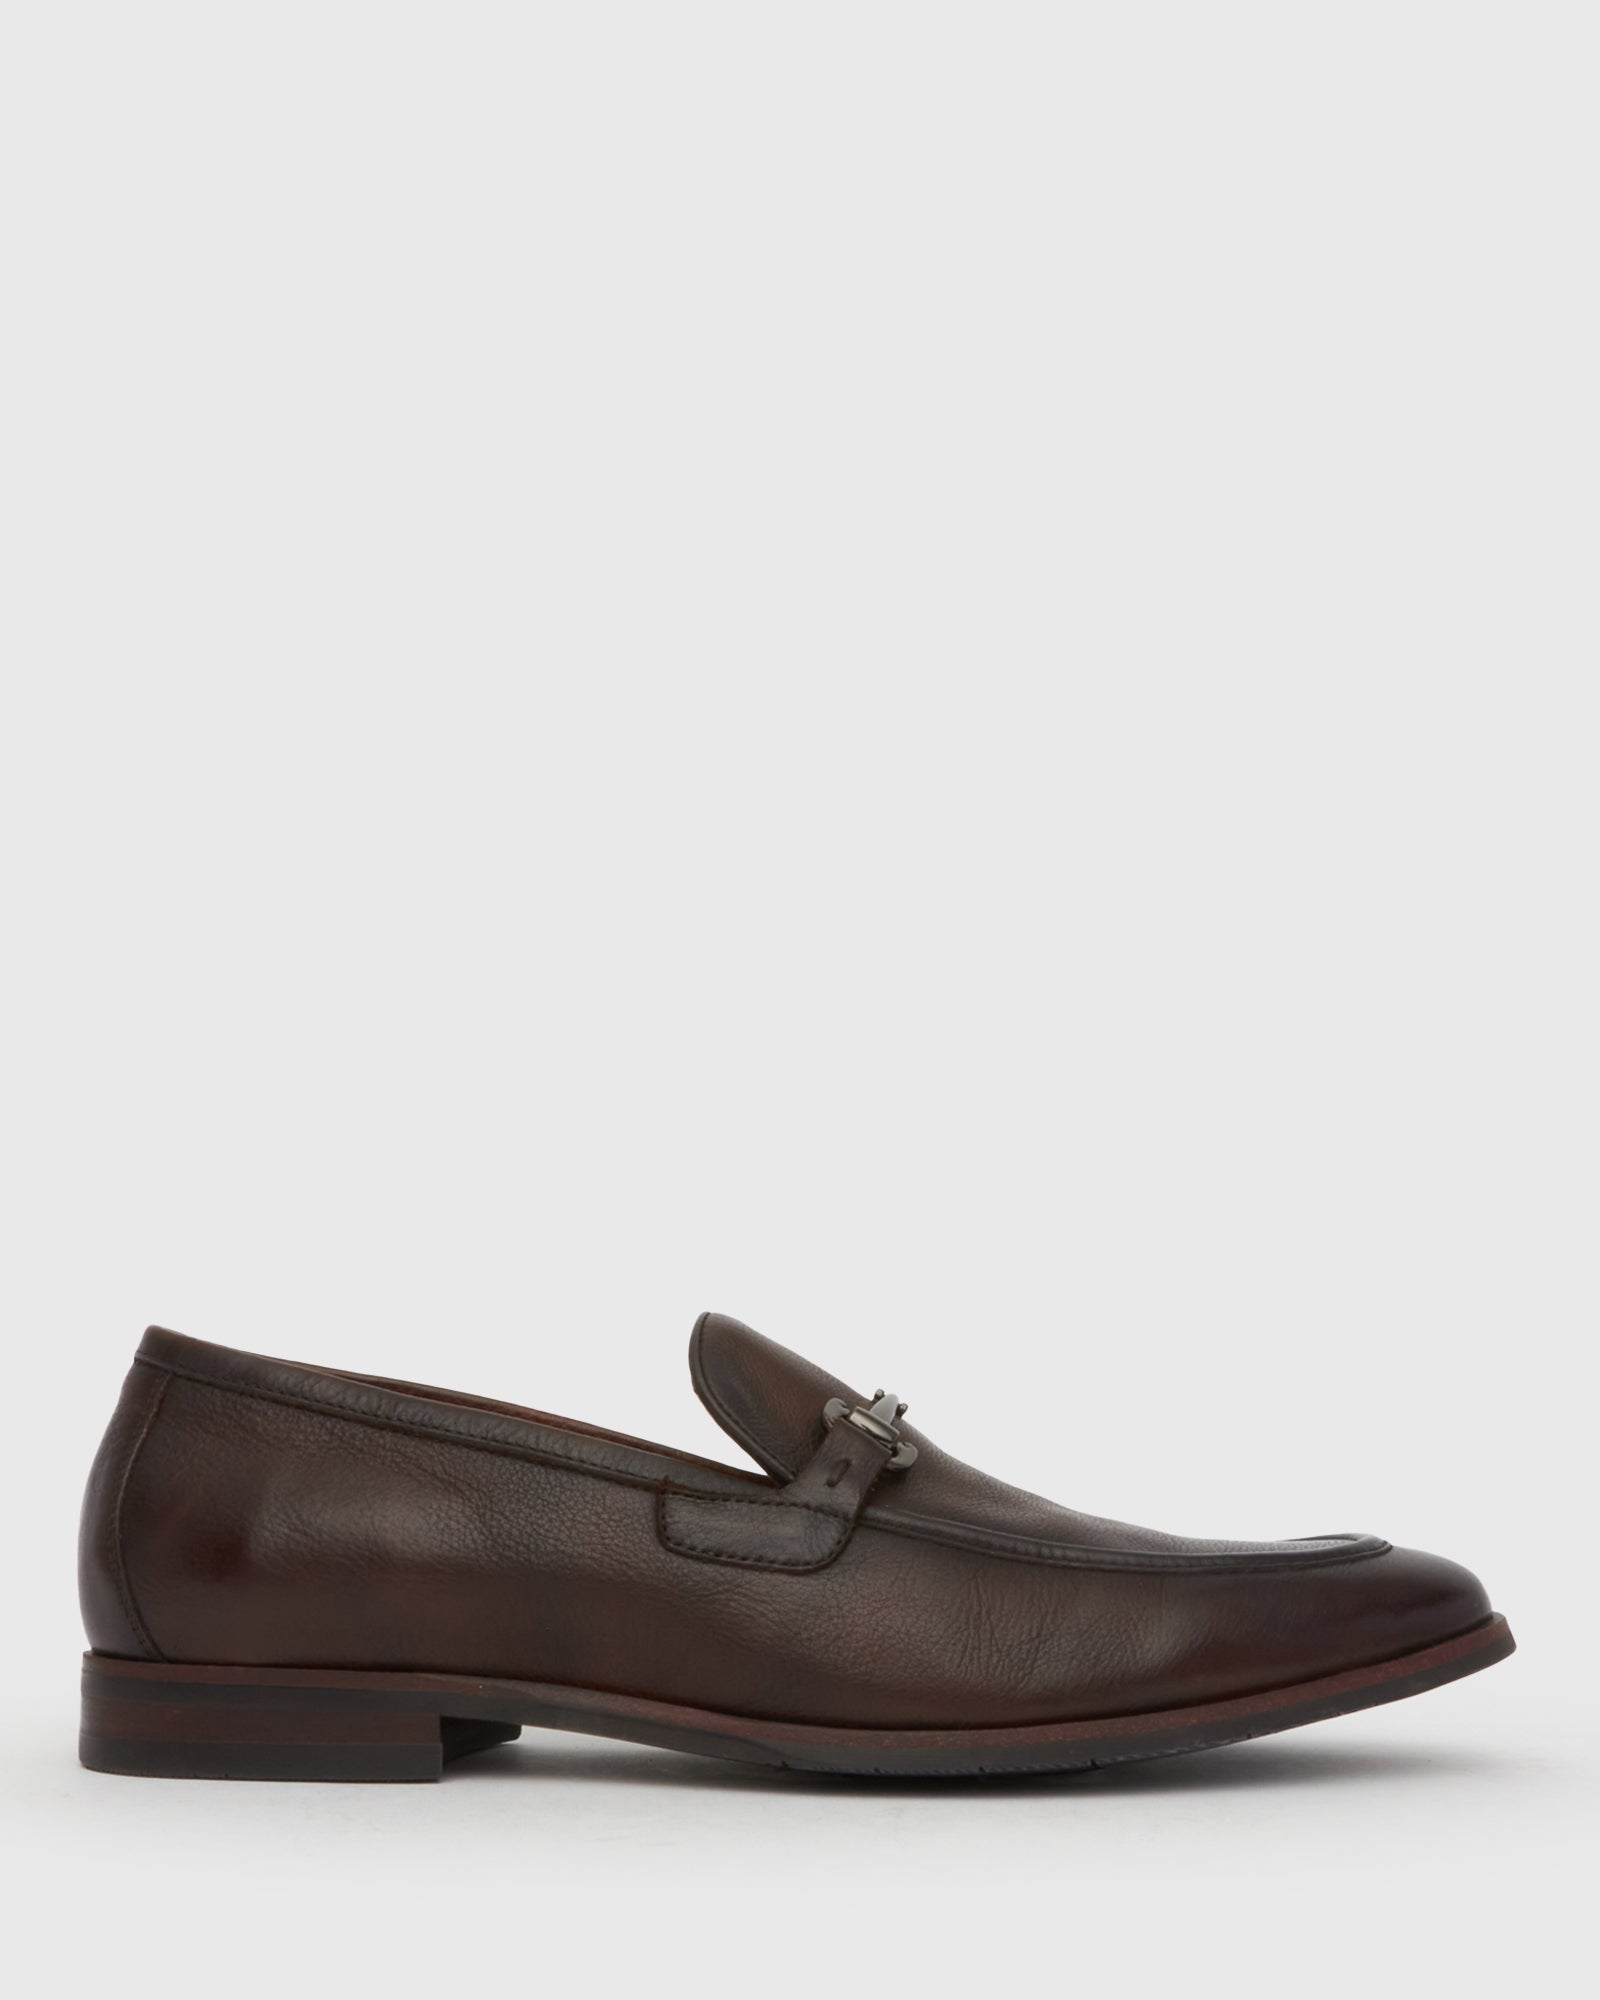 Buy NATE Leather Buckle Trim Loafers by Dakota online - Betts